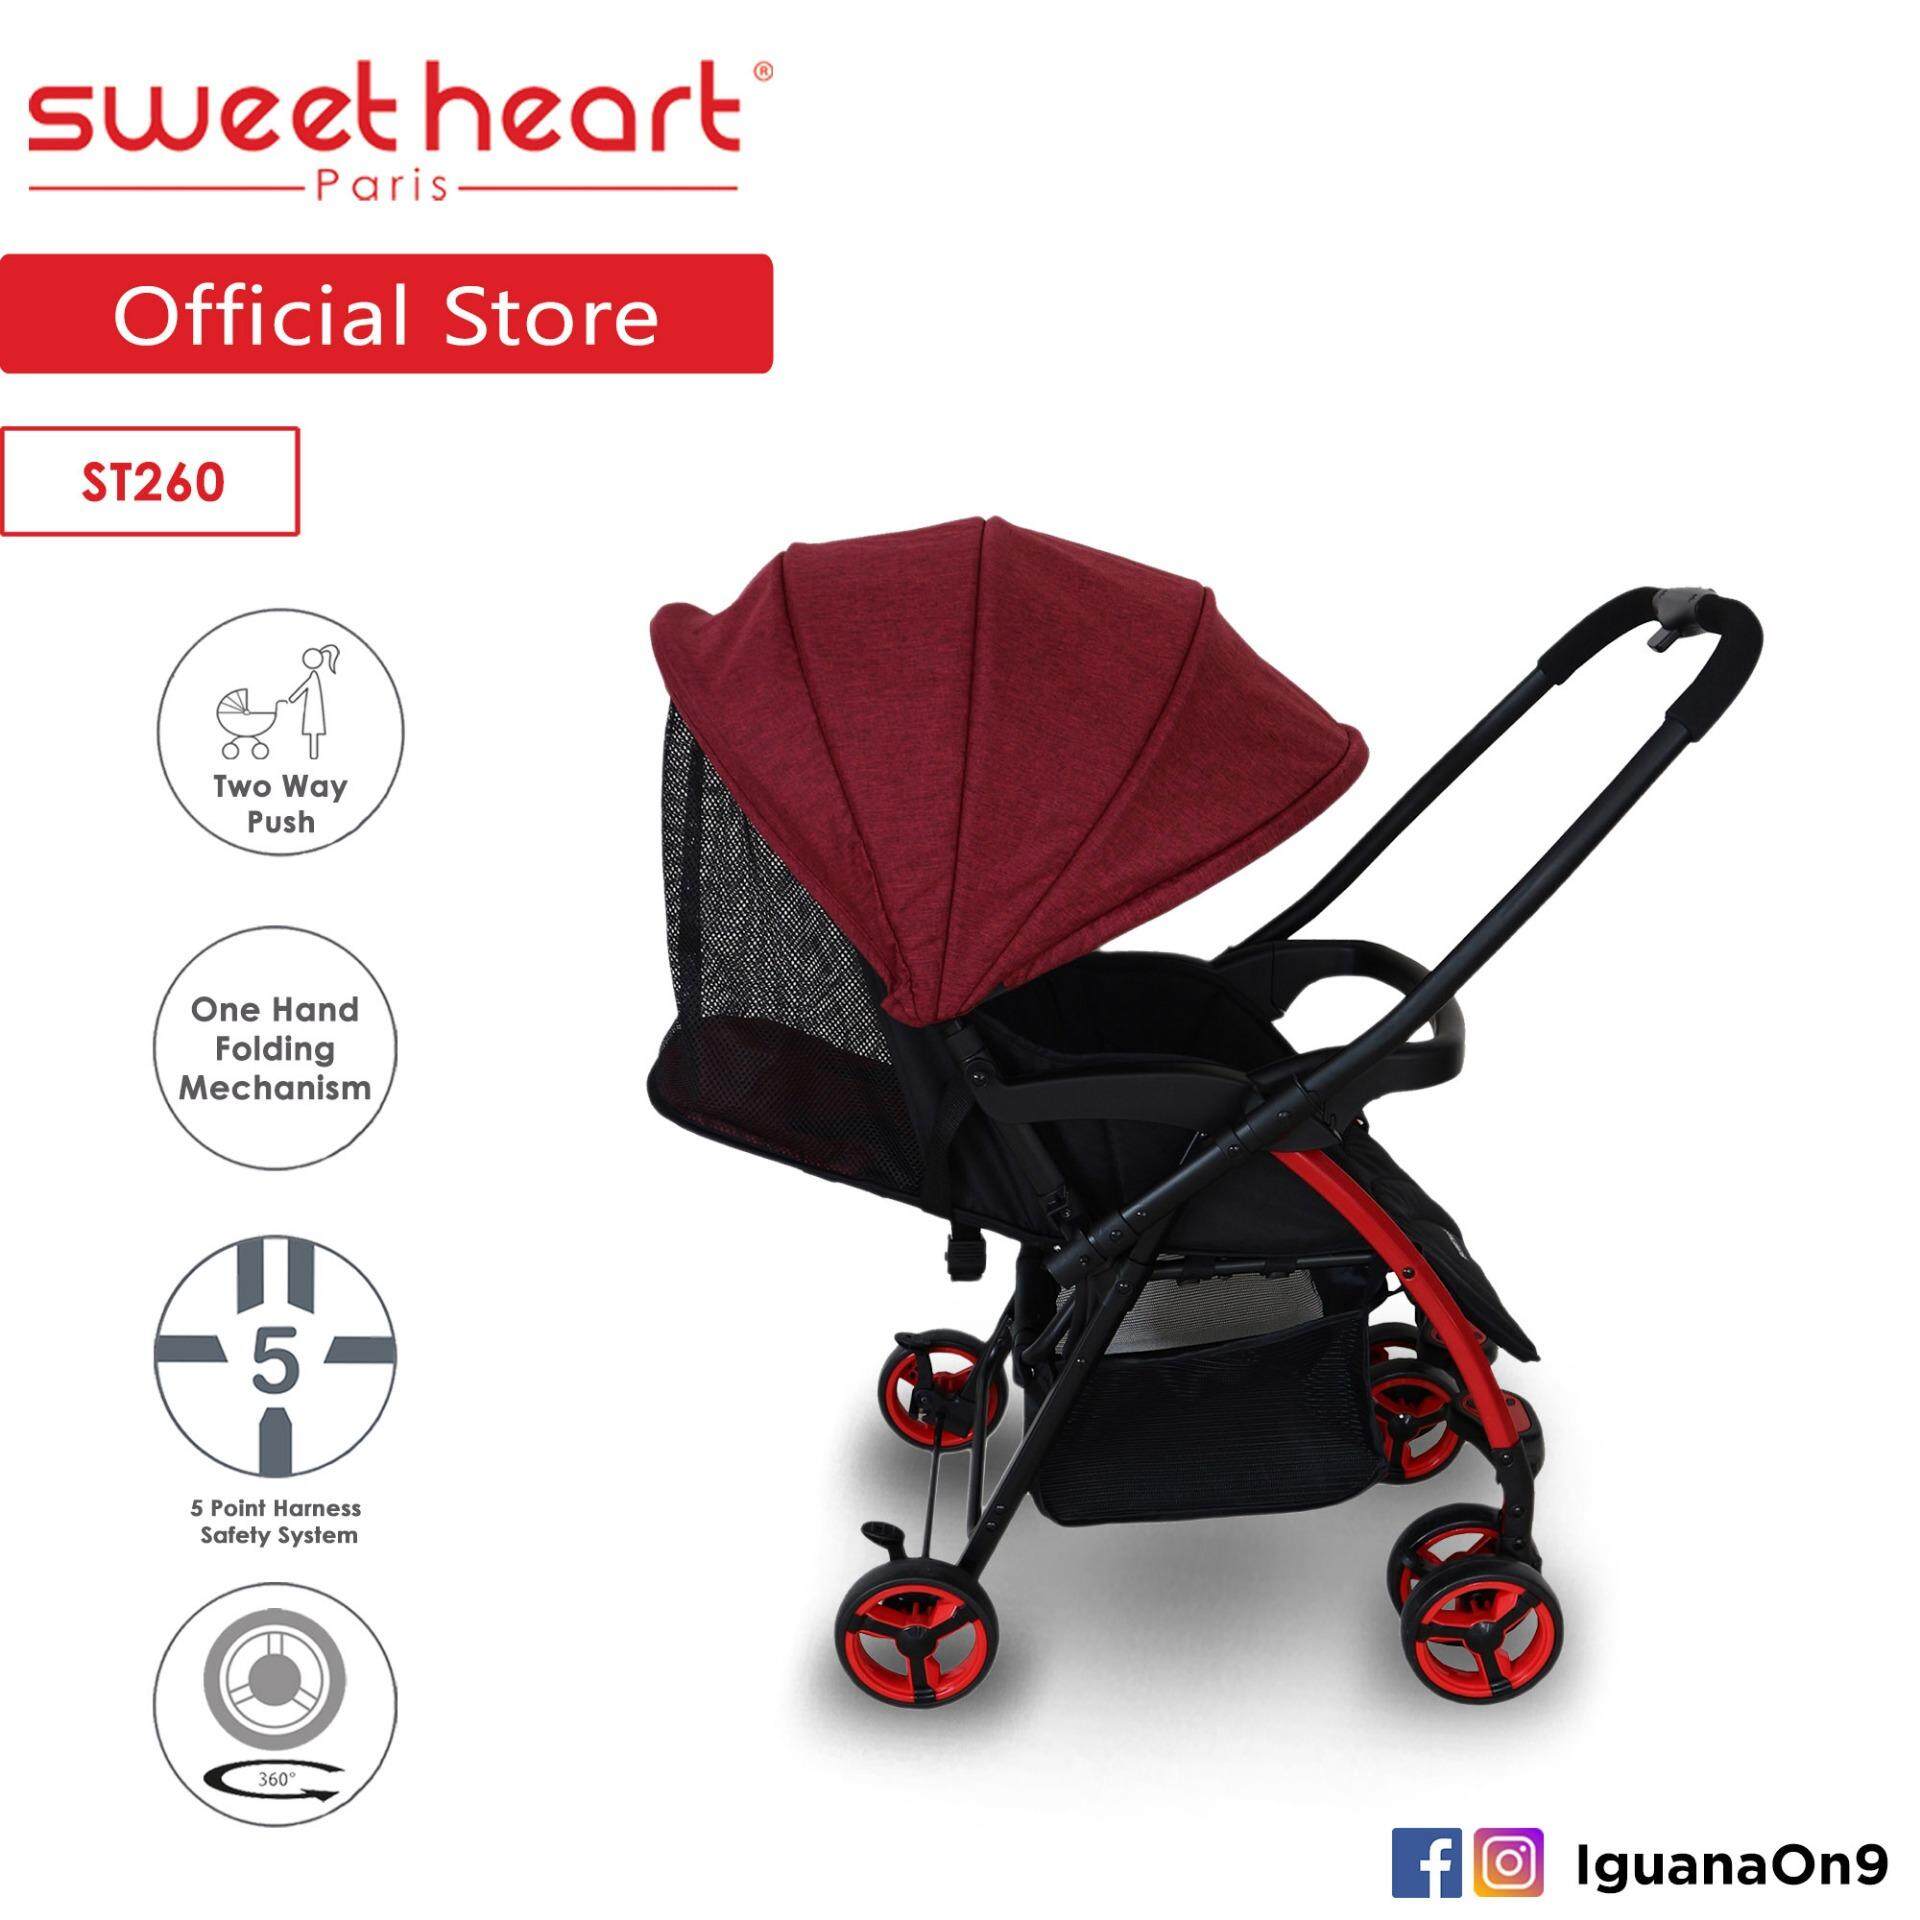 Sweet Heart Paris ST260 Dirt Repellent Stroller (Red) with Reversible One-Handed Folding System